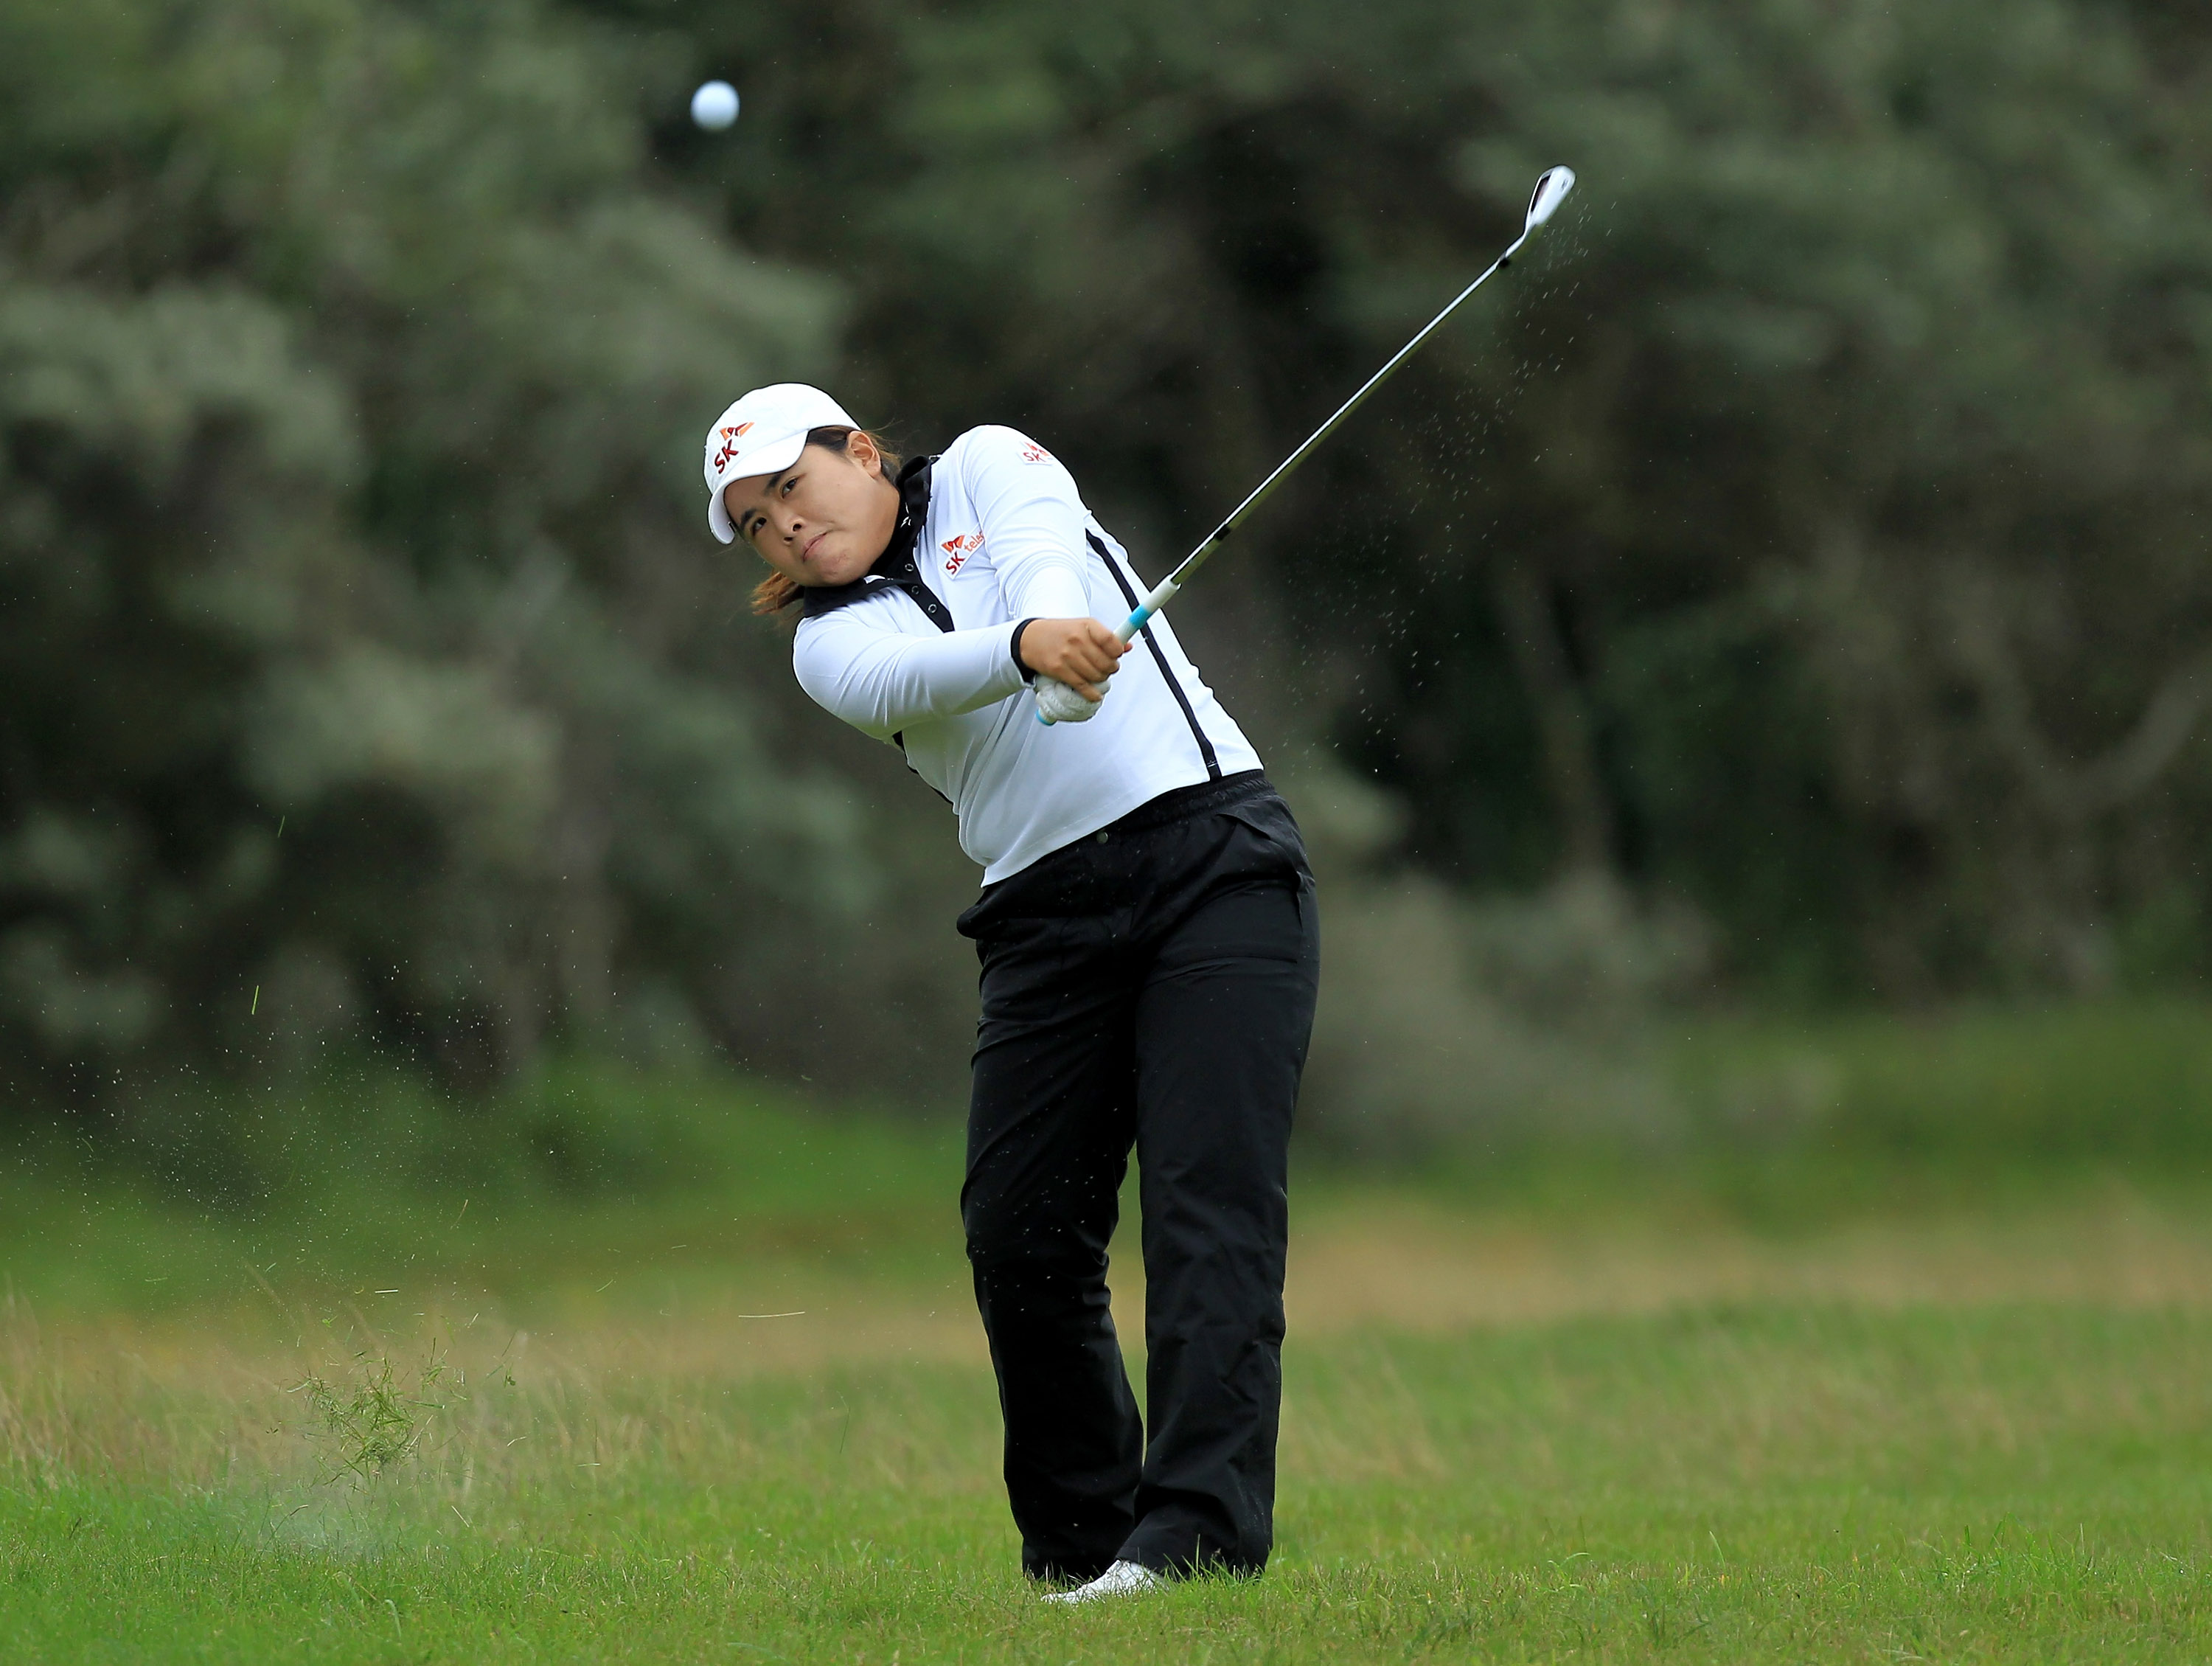 SOUTHPORT, ENGLAND - JULY 30:  Inbee Park of South Korea hits an approach shot during the second round of the 2010 Ricoh Women's British Open at Royal Birkdale on July 30, 2010 in Southport, England.  (Photo by David Cannon/Getty Images)